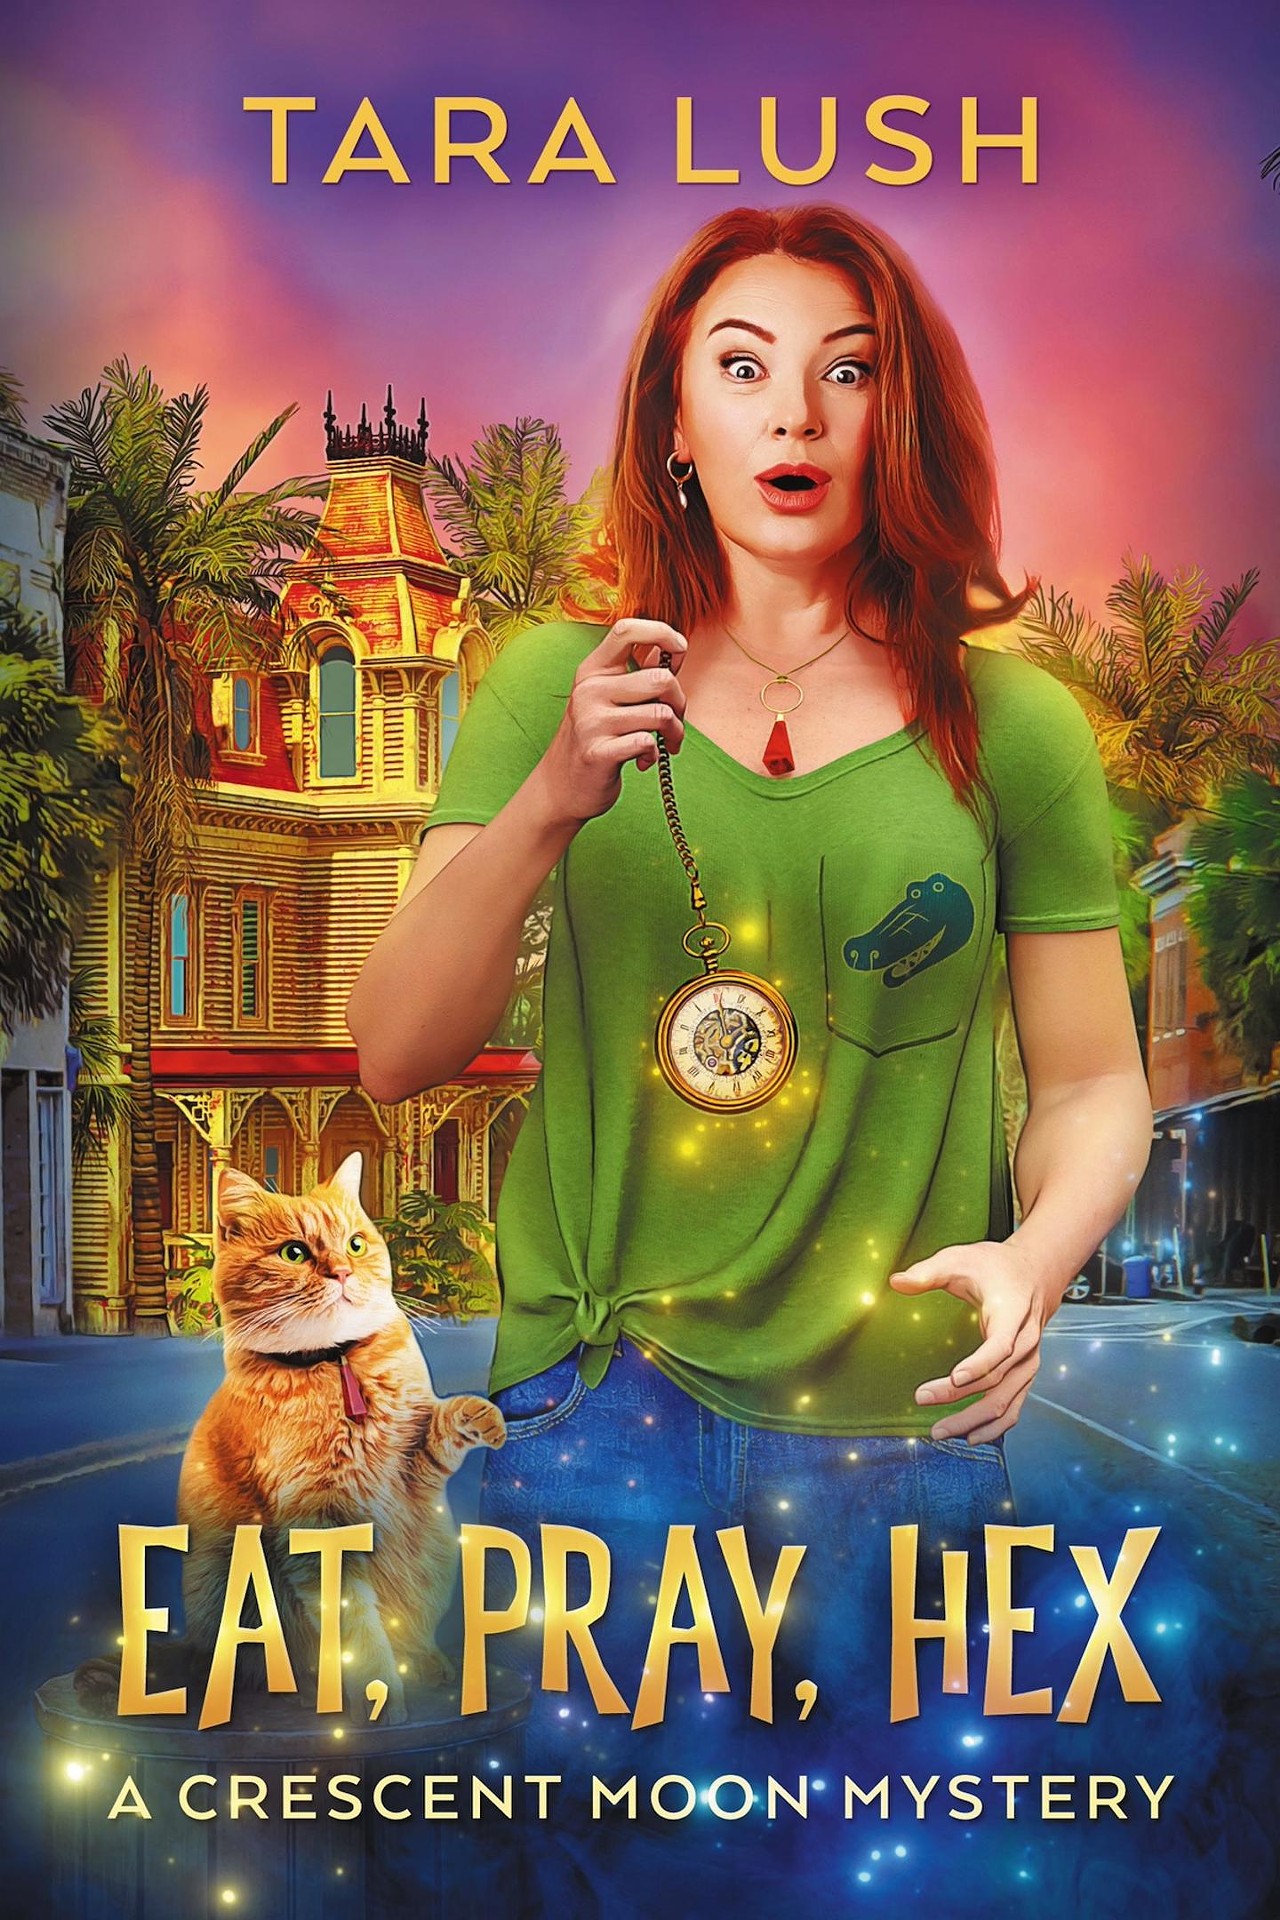 ‘Eat, Pray, Hex’ By Tara Lush
In Crescent Moon Mysteries Book 1, a perimenopausal woman inherits a supposedly haunted Florida inn and has to use newfound psychic powers to help a deceased relative solve a murder. Journalist and crime fiction author Tara Lush delves into the cozy paranormal mystery featuring a middle-aged protagonist and a cat named Freddie Purrcury. (Independently published)
Photo via taralush.com